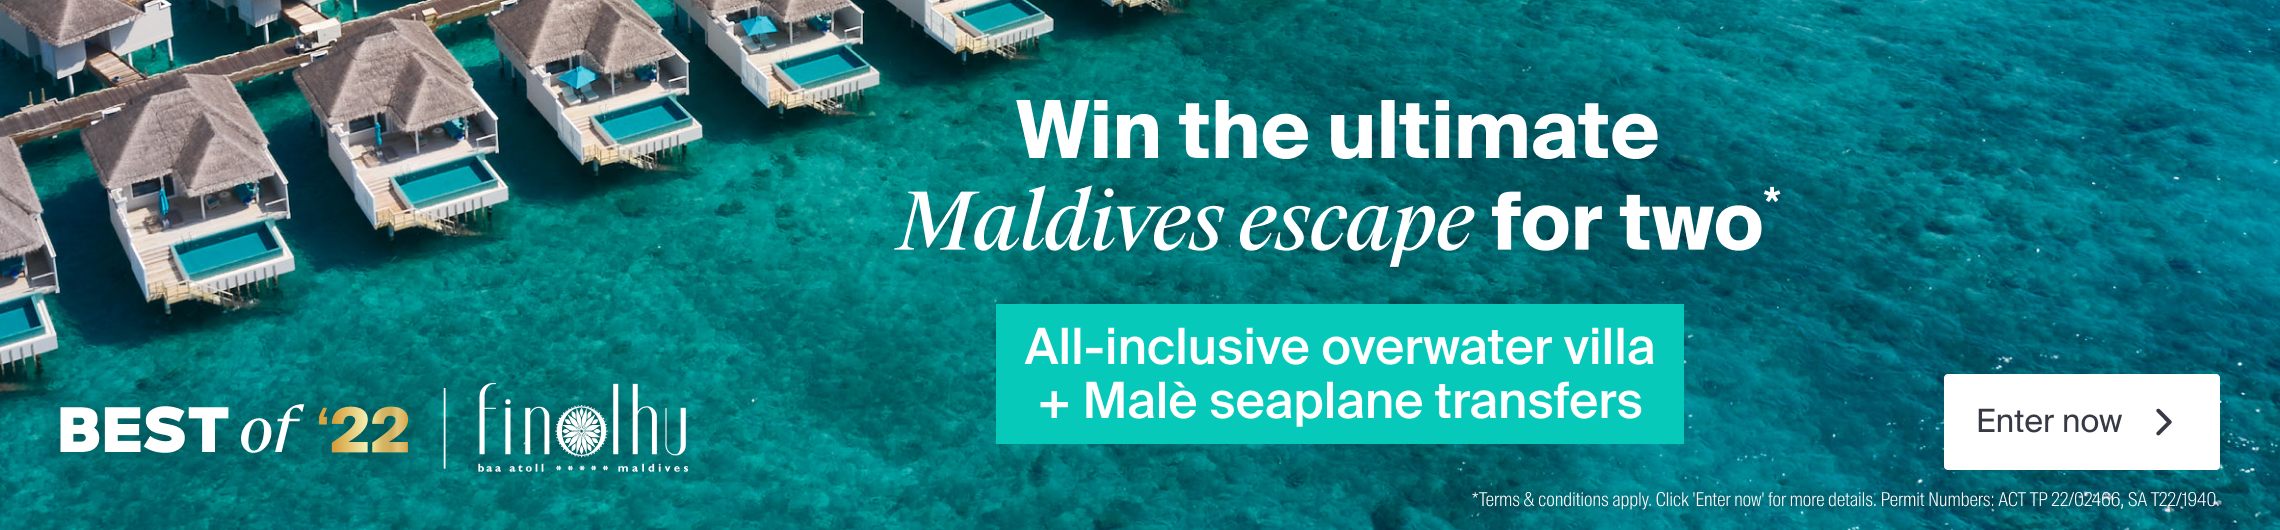 Maldives competition banner